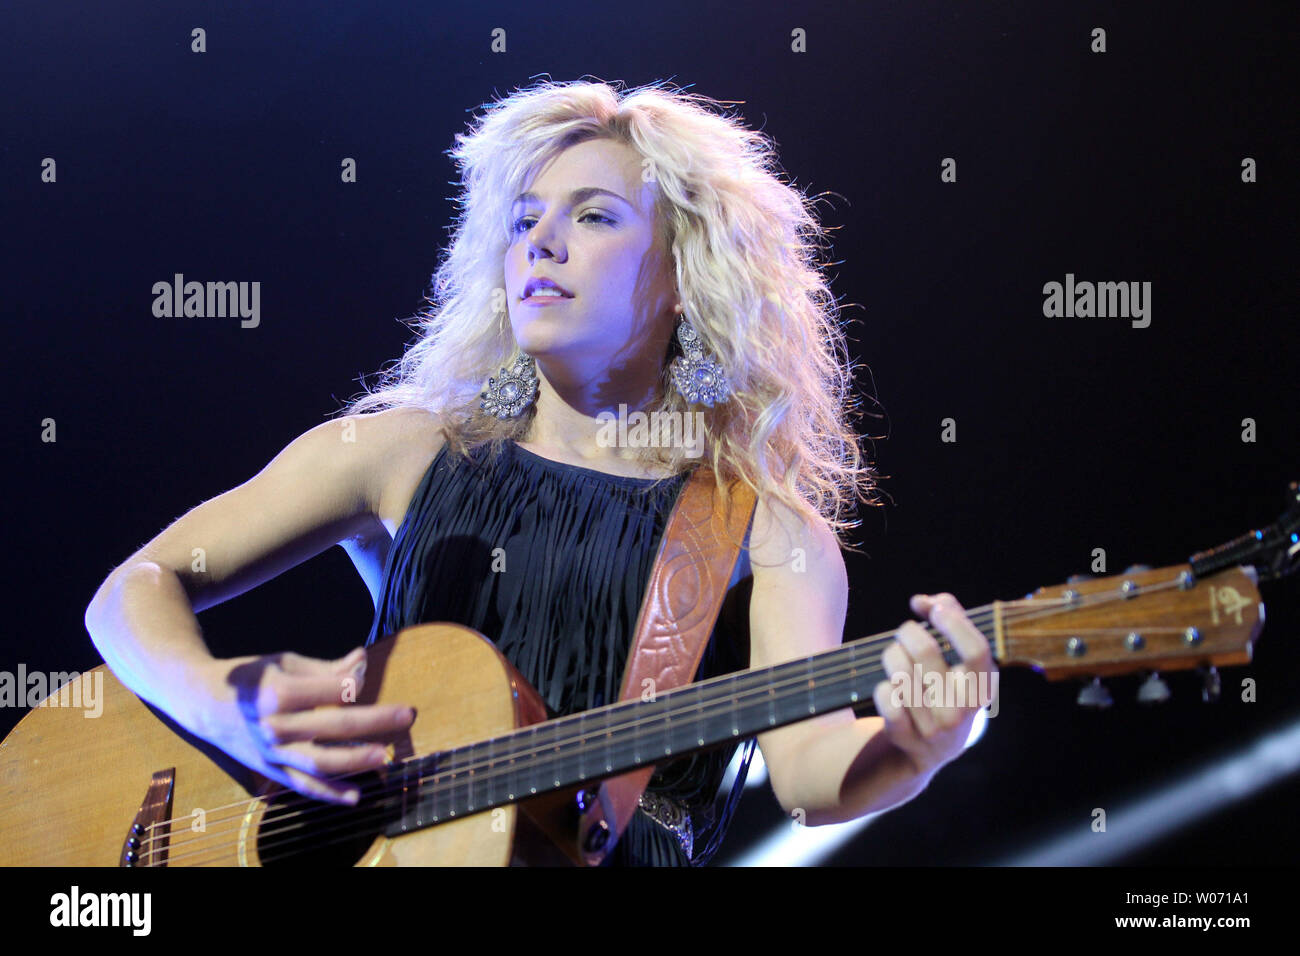 Kimberly Perry, lead singer for The Band Perry, entertains the crowds at the Pageant Theater during a concert to benefit the USO of Missouri, in St. Louis on September 30, 2011. UPI/Bill Greenblatt Stock Photo